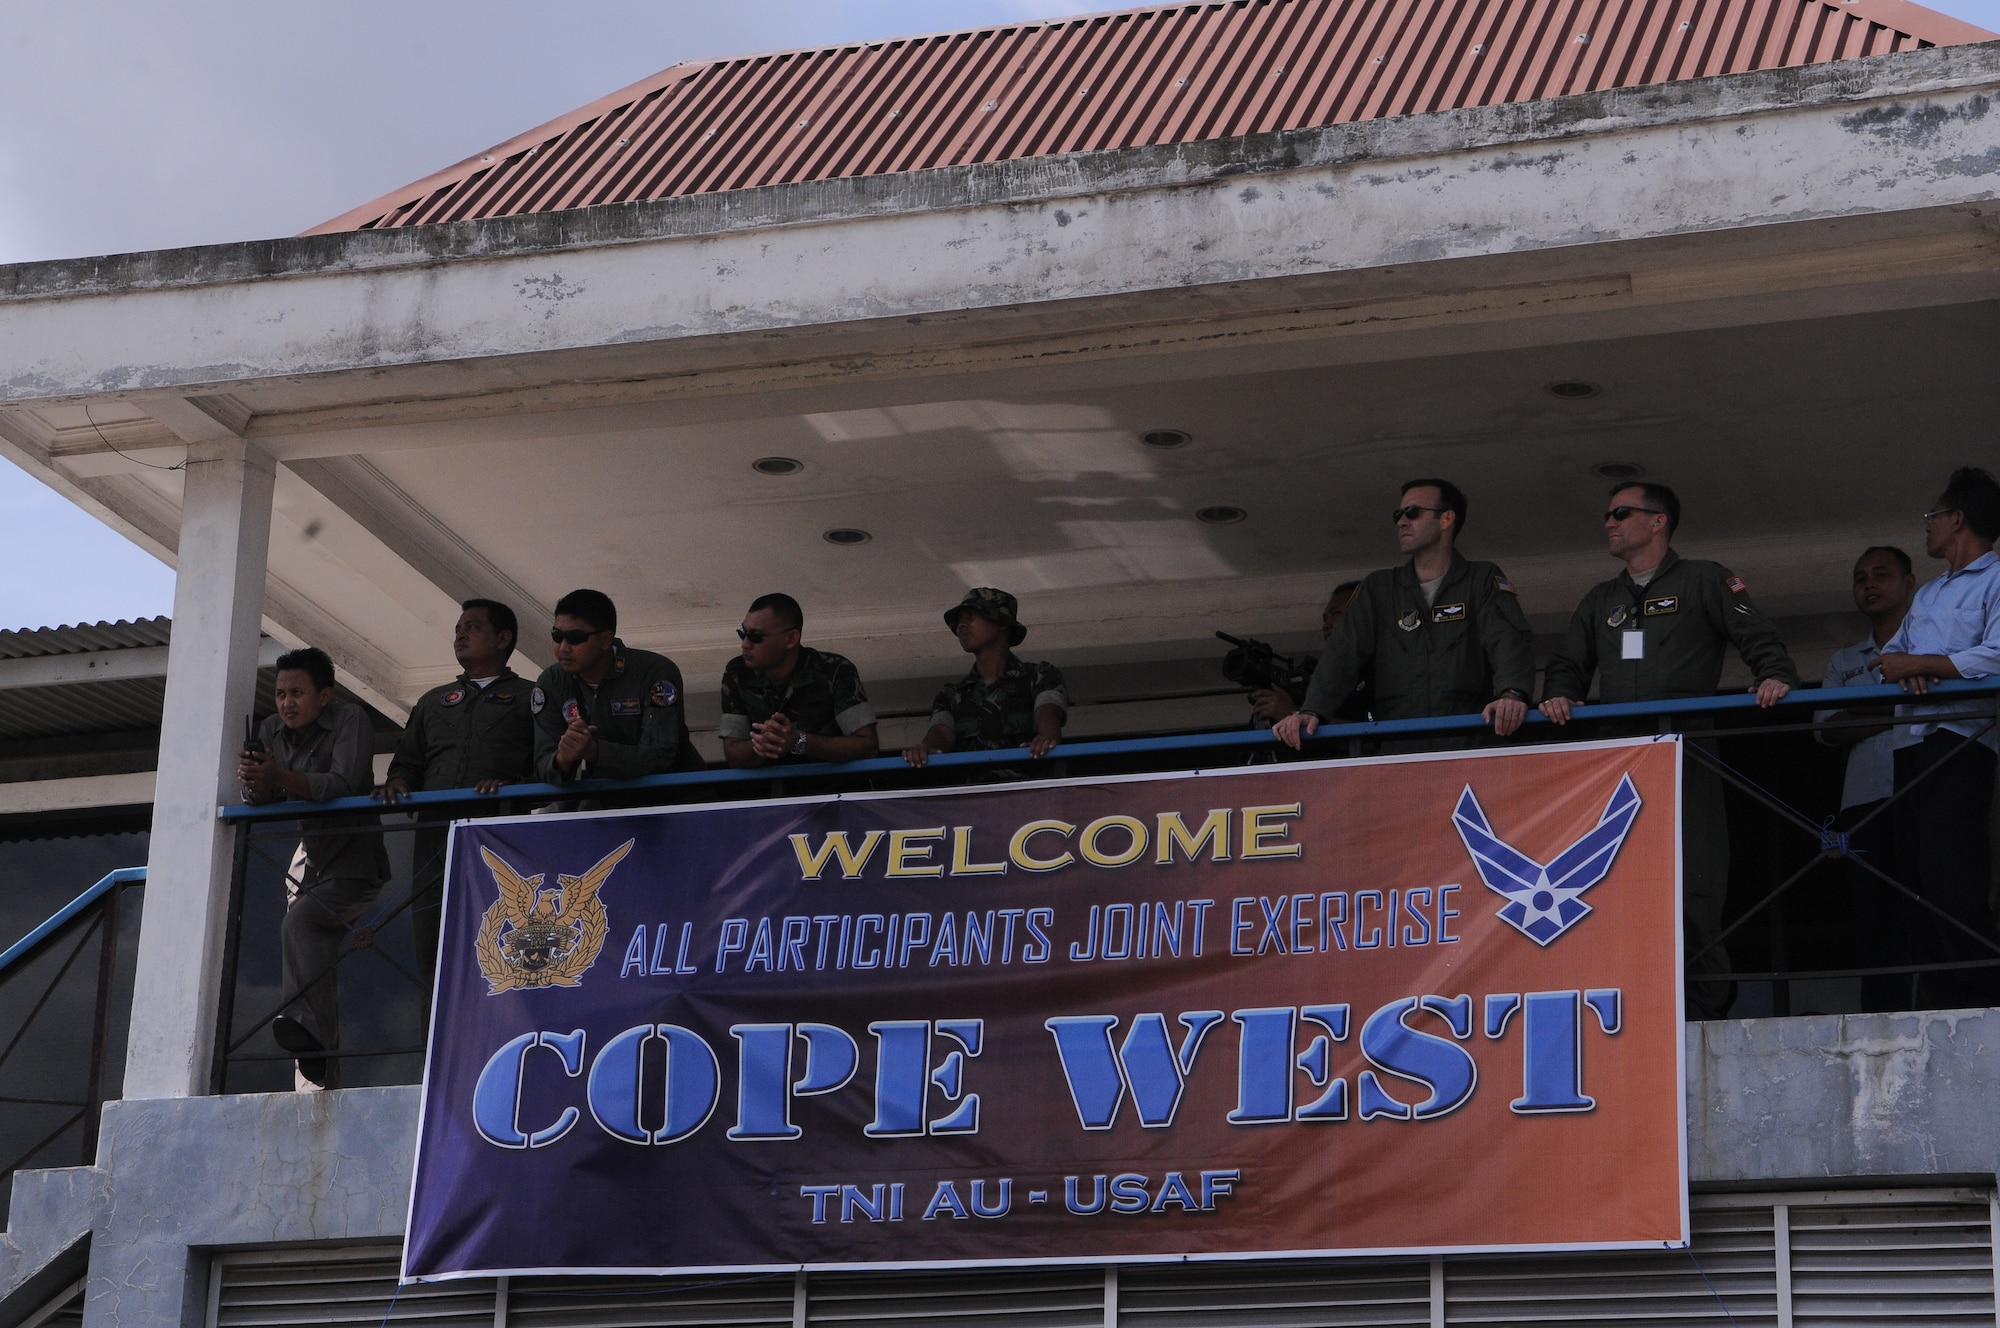 Two U.S Air Force officers discuss various scenarios that U.S. and Indonesian airmen will participate in during exercise Cope West 10 at Halim Air Base, Indonesia, April 17.  Cope West is a Pacific Air Forces- sponsored bilateral tactical airlift exercise involving the U.S. and Indonesian Air Forces.  The exercise is designed to advance interoperability between the U.S. and Indonesian Air Forces, and promote cooperation and unity of purpose. Cope West 10 is scheduled through April 23. 